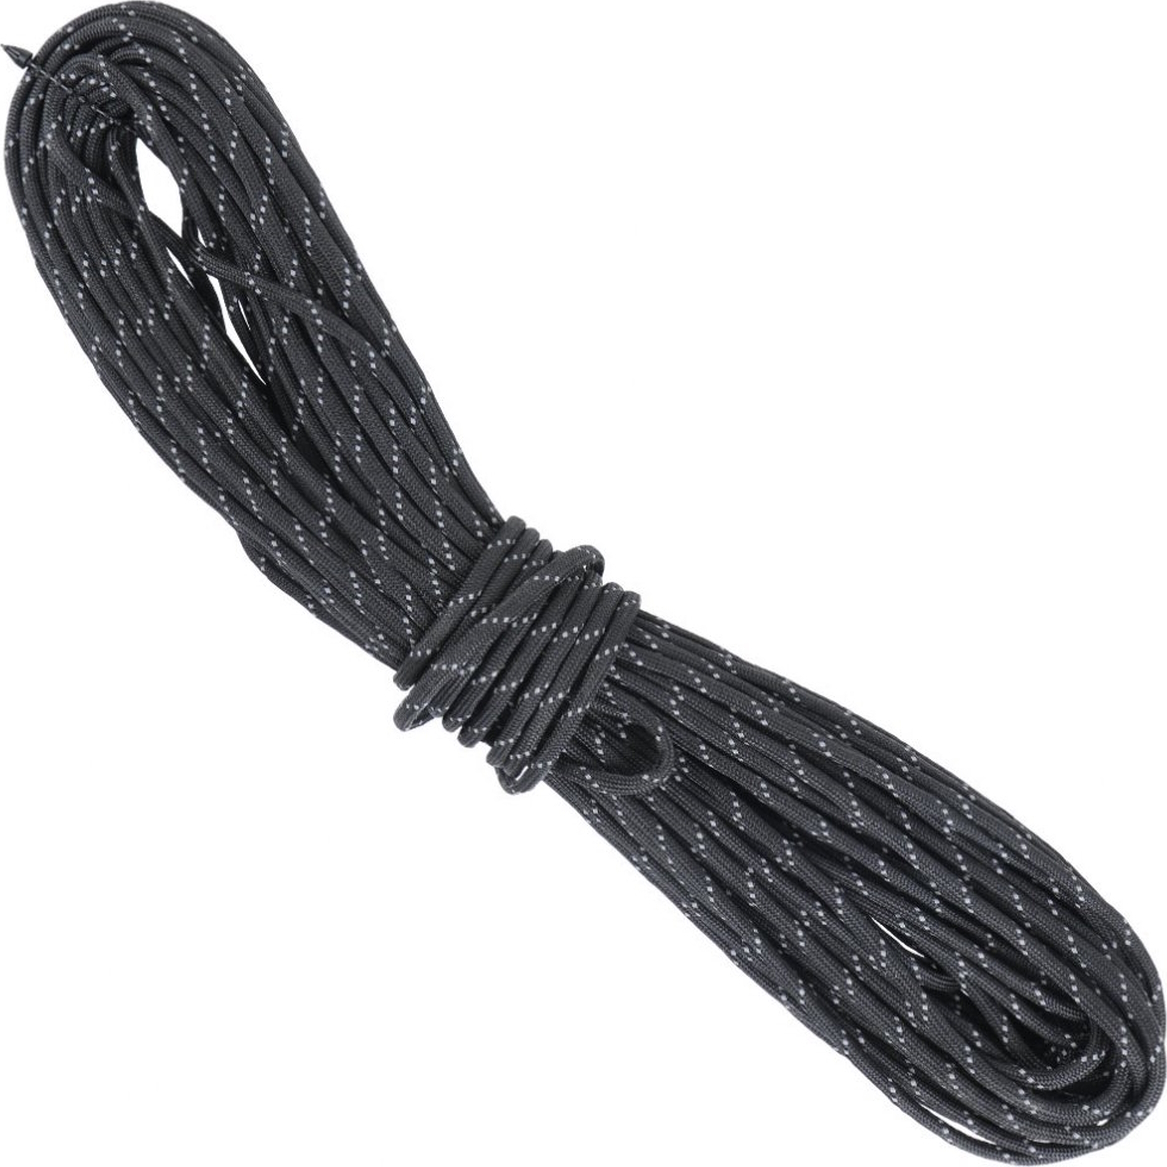 550 Paracord Reflective, Buy 550 Paracord Reflective here